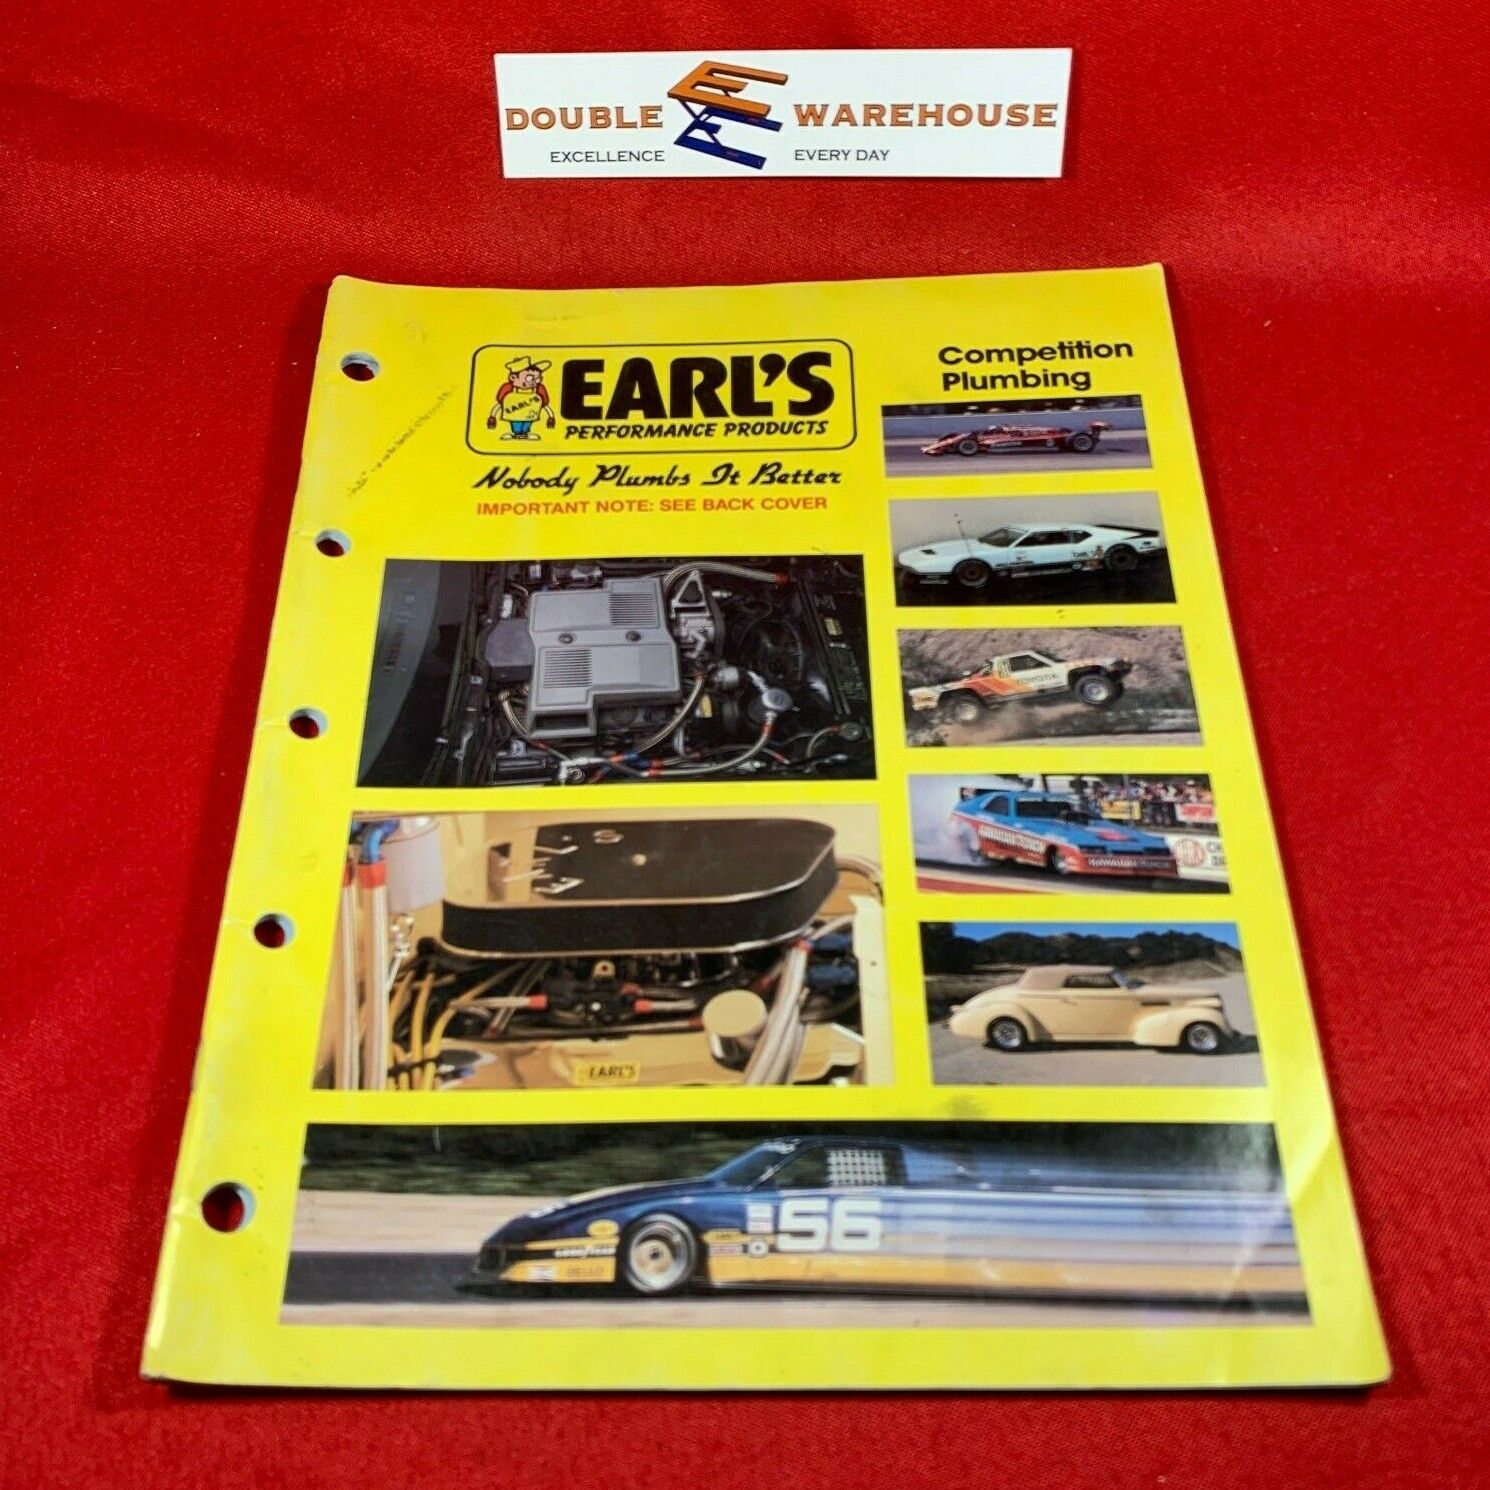 Vintage 1986 Earl\'s Performance Products Catalog, Competition Plumbing